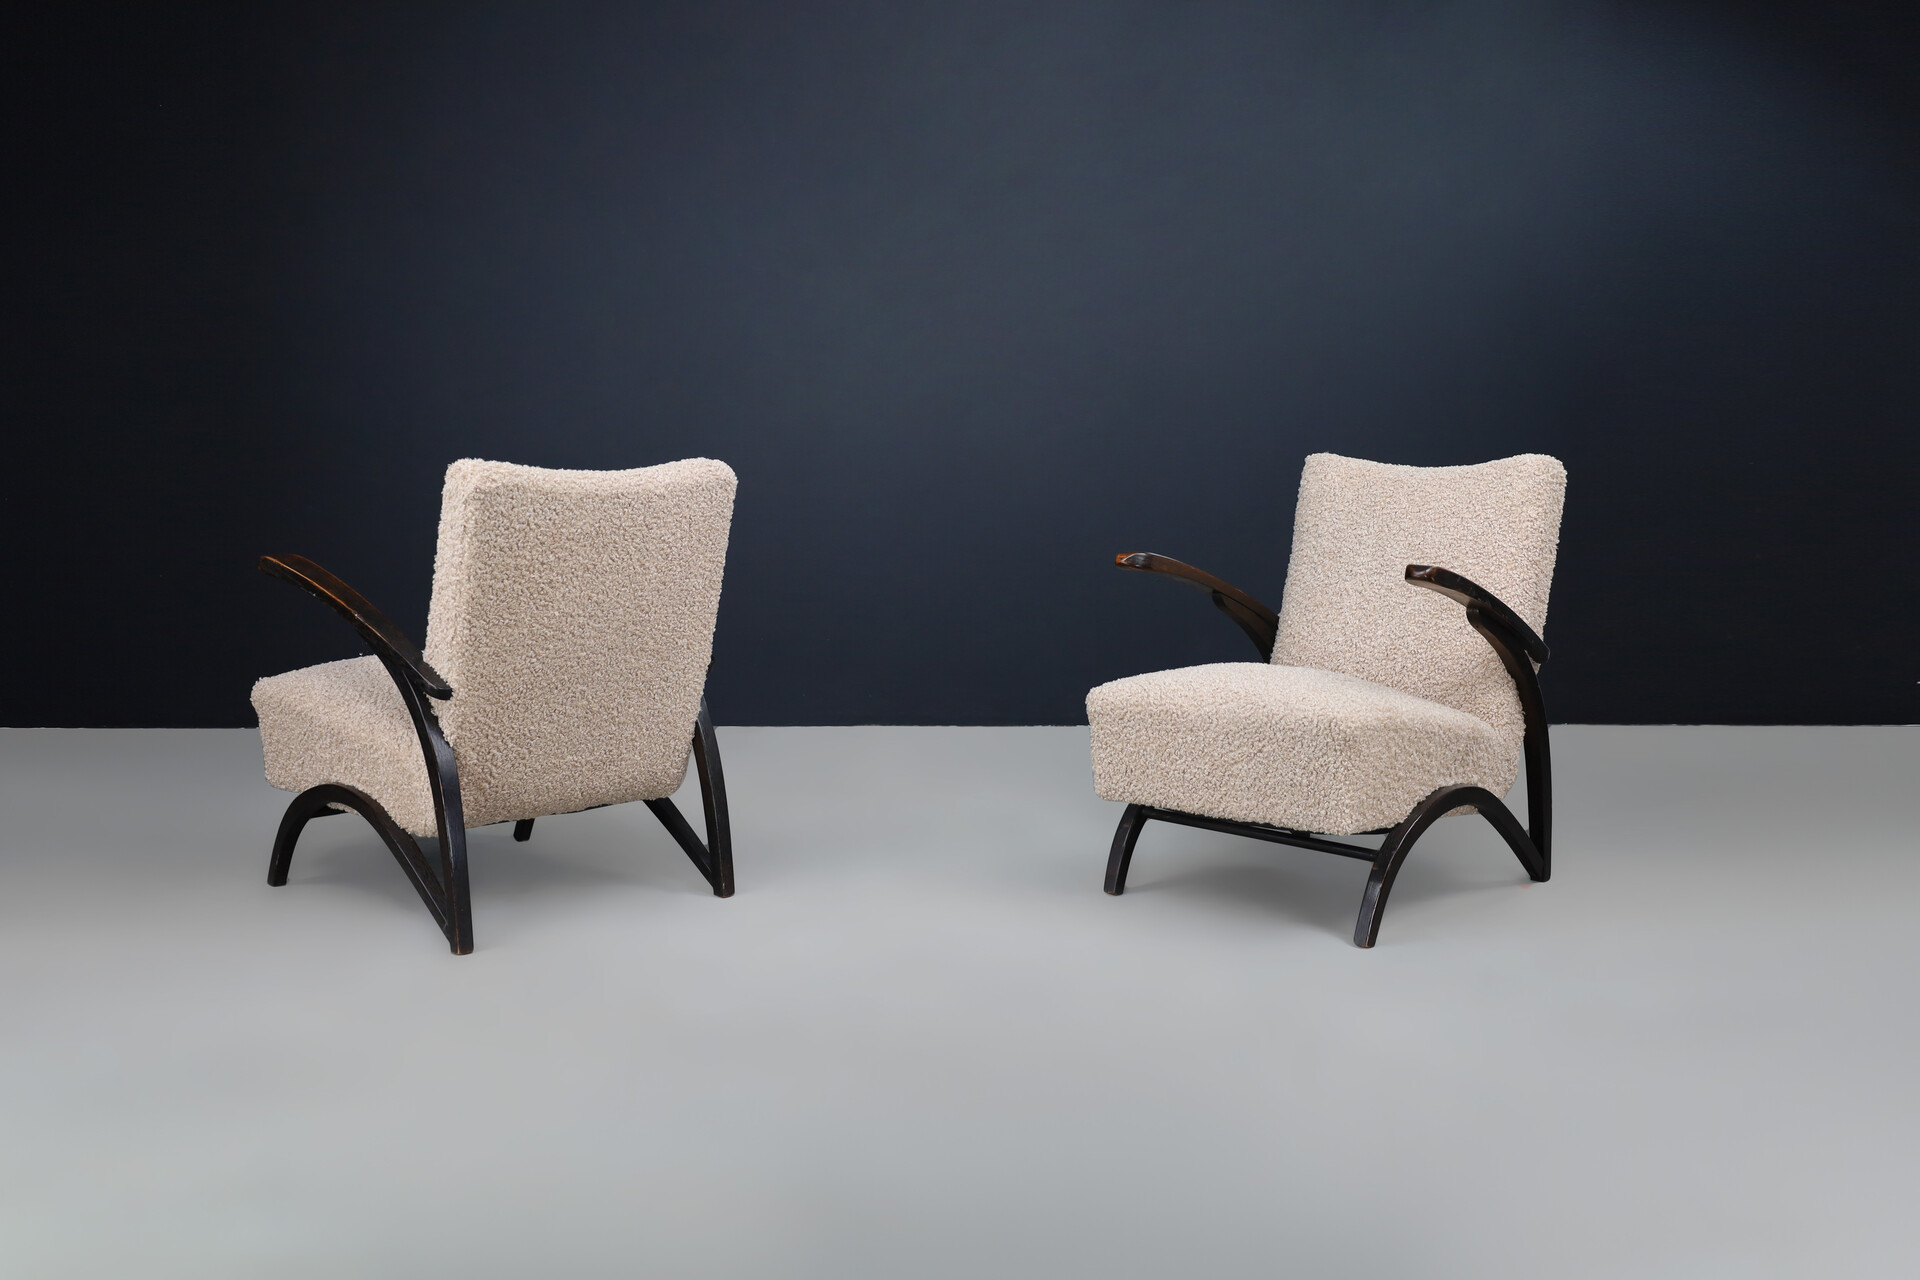 Mid century modern Art Deco lounge chairs in bouclé upholstery by Jindřich Halabala, 1940s Mid-20th century